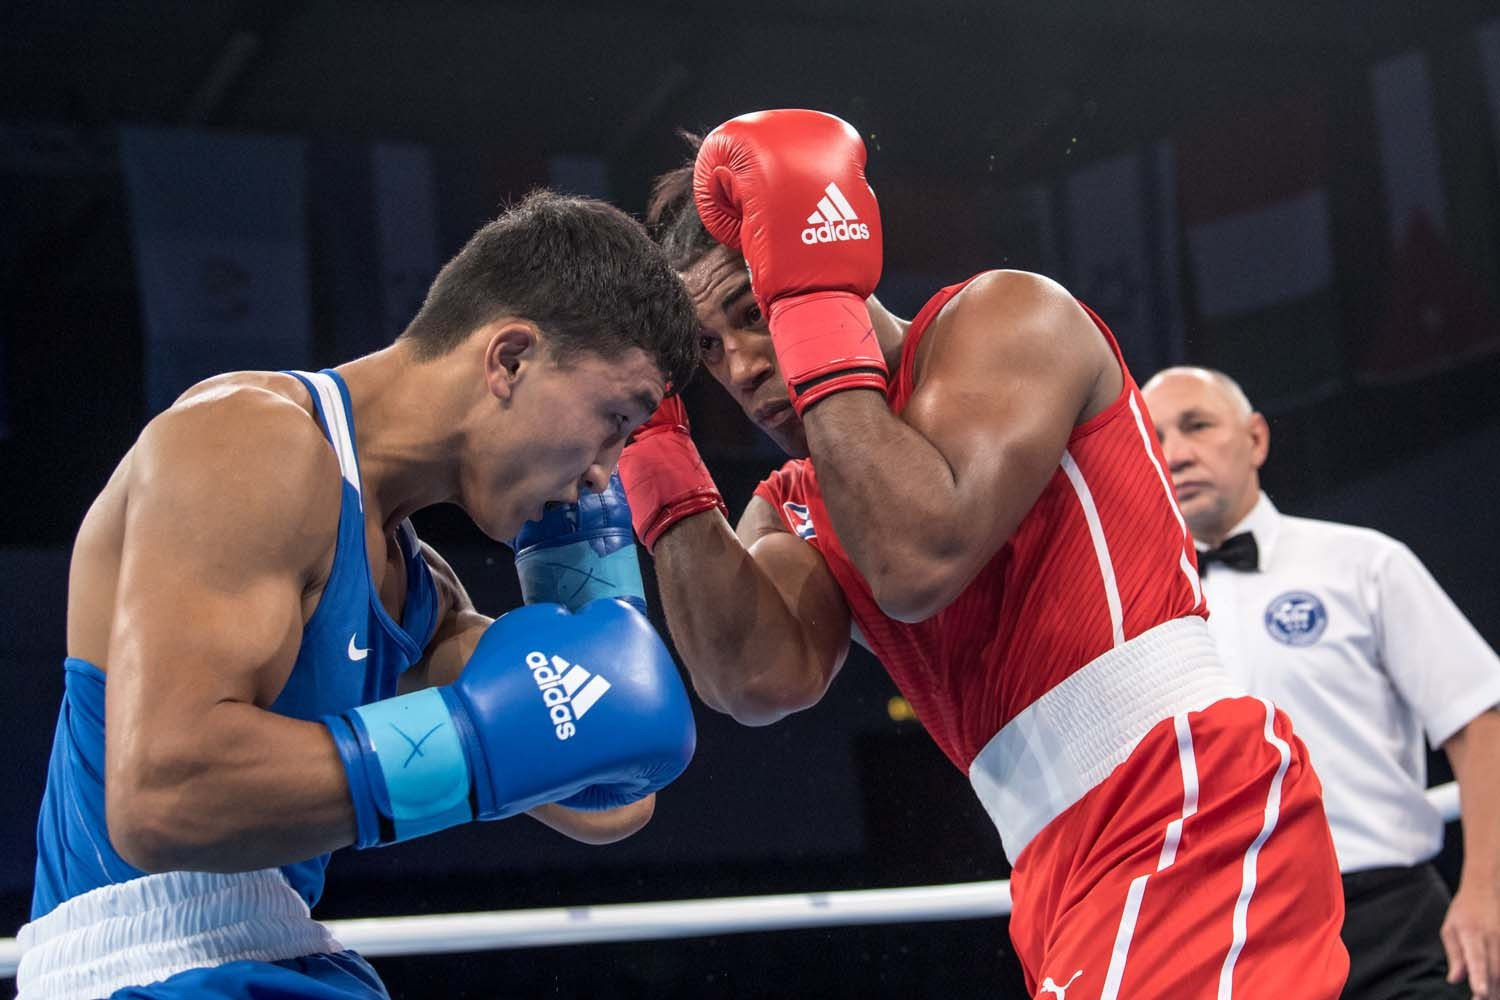 Reigning world and Olympic middleweight champion Arlen López of Cuba suffered a shock split-decision defeat at the hands of Kazakhstan's Abilkhan Amankul ©AIBA